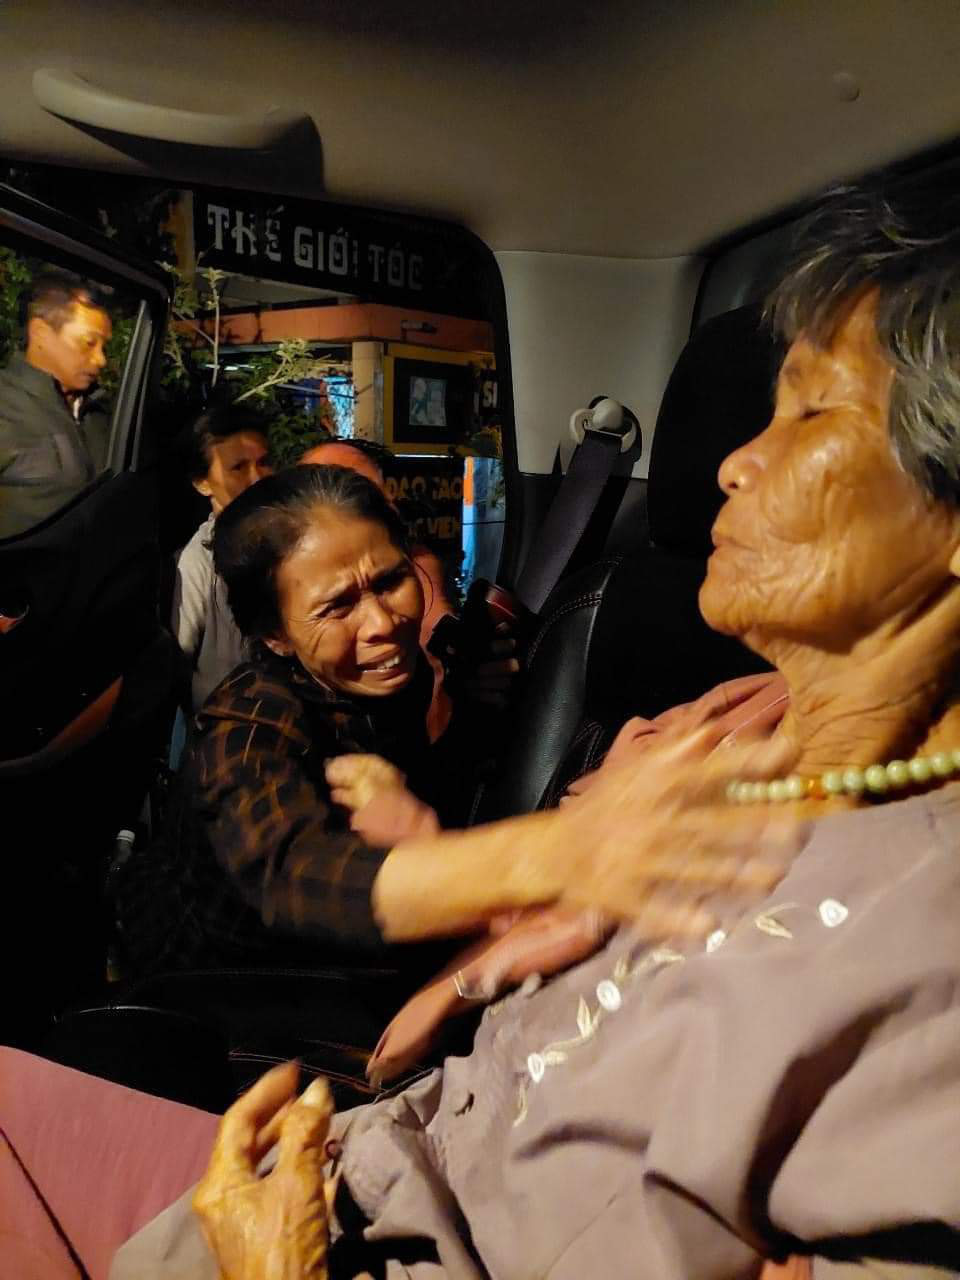 Relatives react upon the reunion with 78-year-old Nguyen Thi Anh in Quang Ngai Province, Vietnam, February 23, 2023. Photo: K.P. / Tuoi Tre